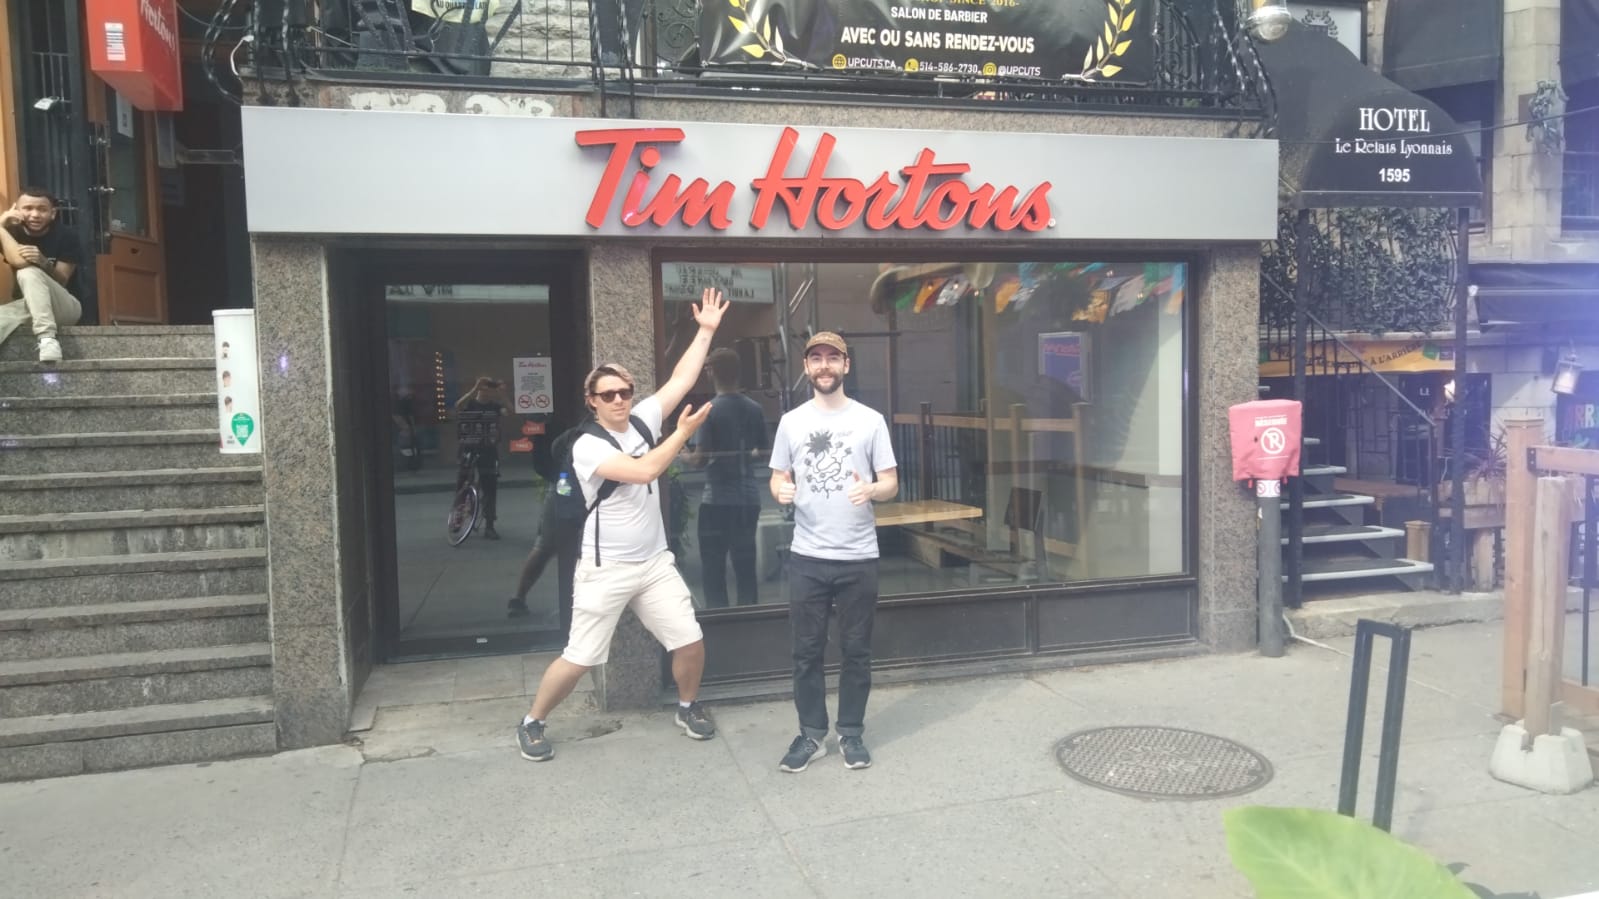 My friend steve cheating at a tim hortons